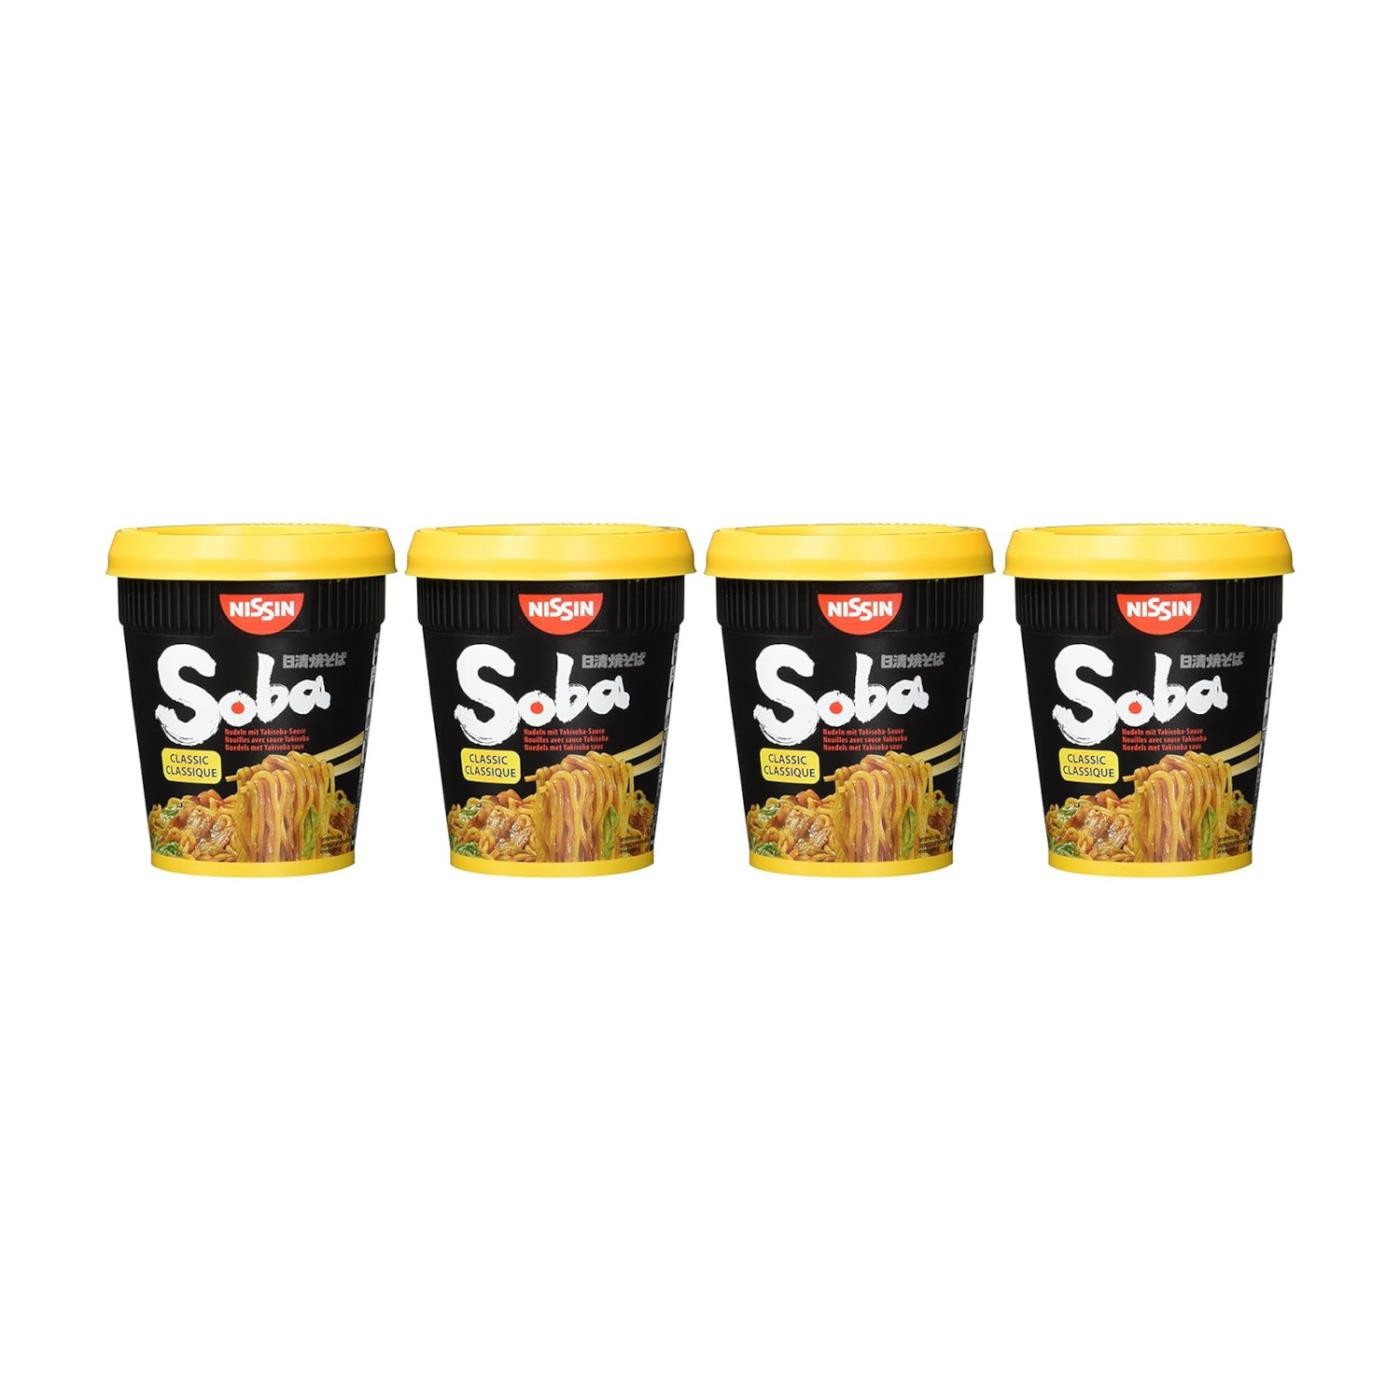 NISSIN SOBA CUP CLASSIC 4x 90g Becher